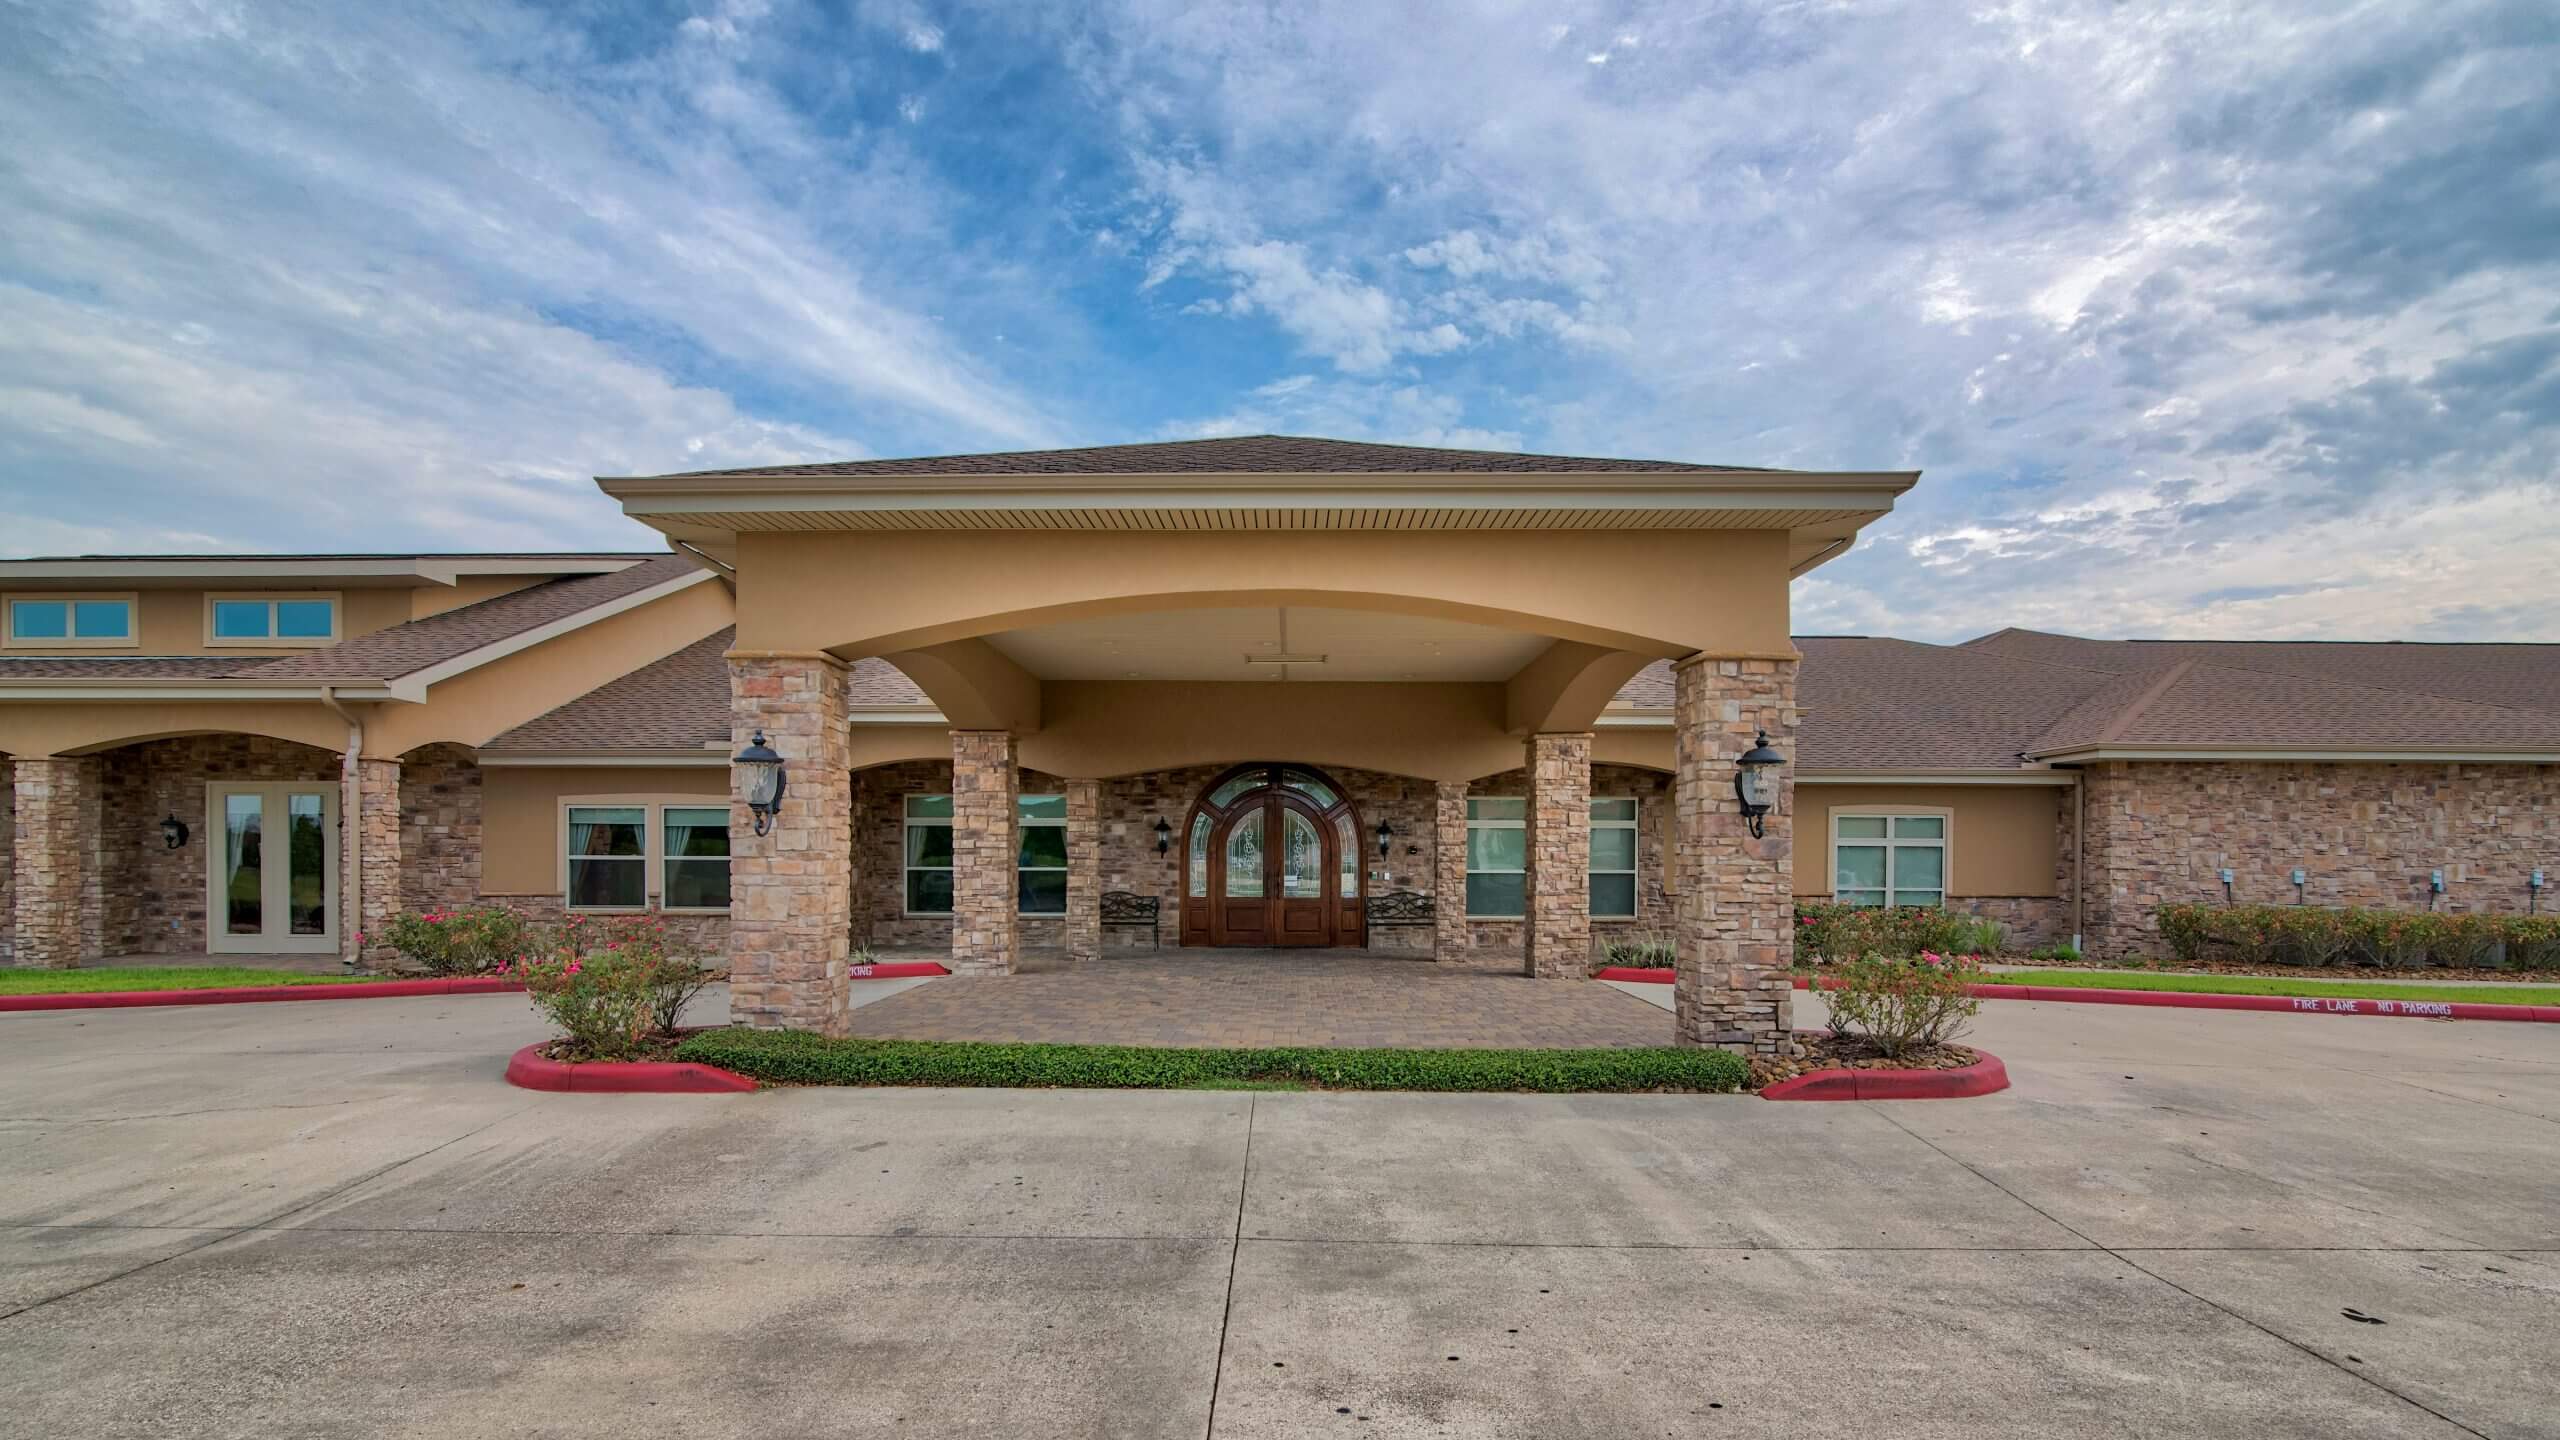 Pelican Bay Assisted Living community in Beaumont, TX